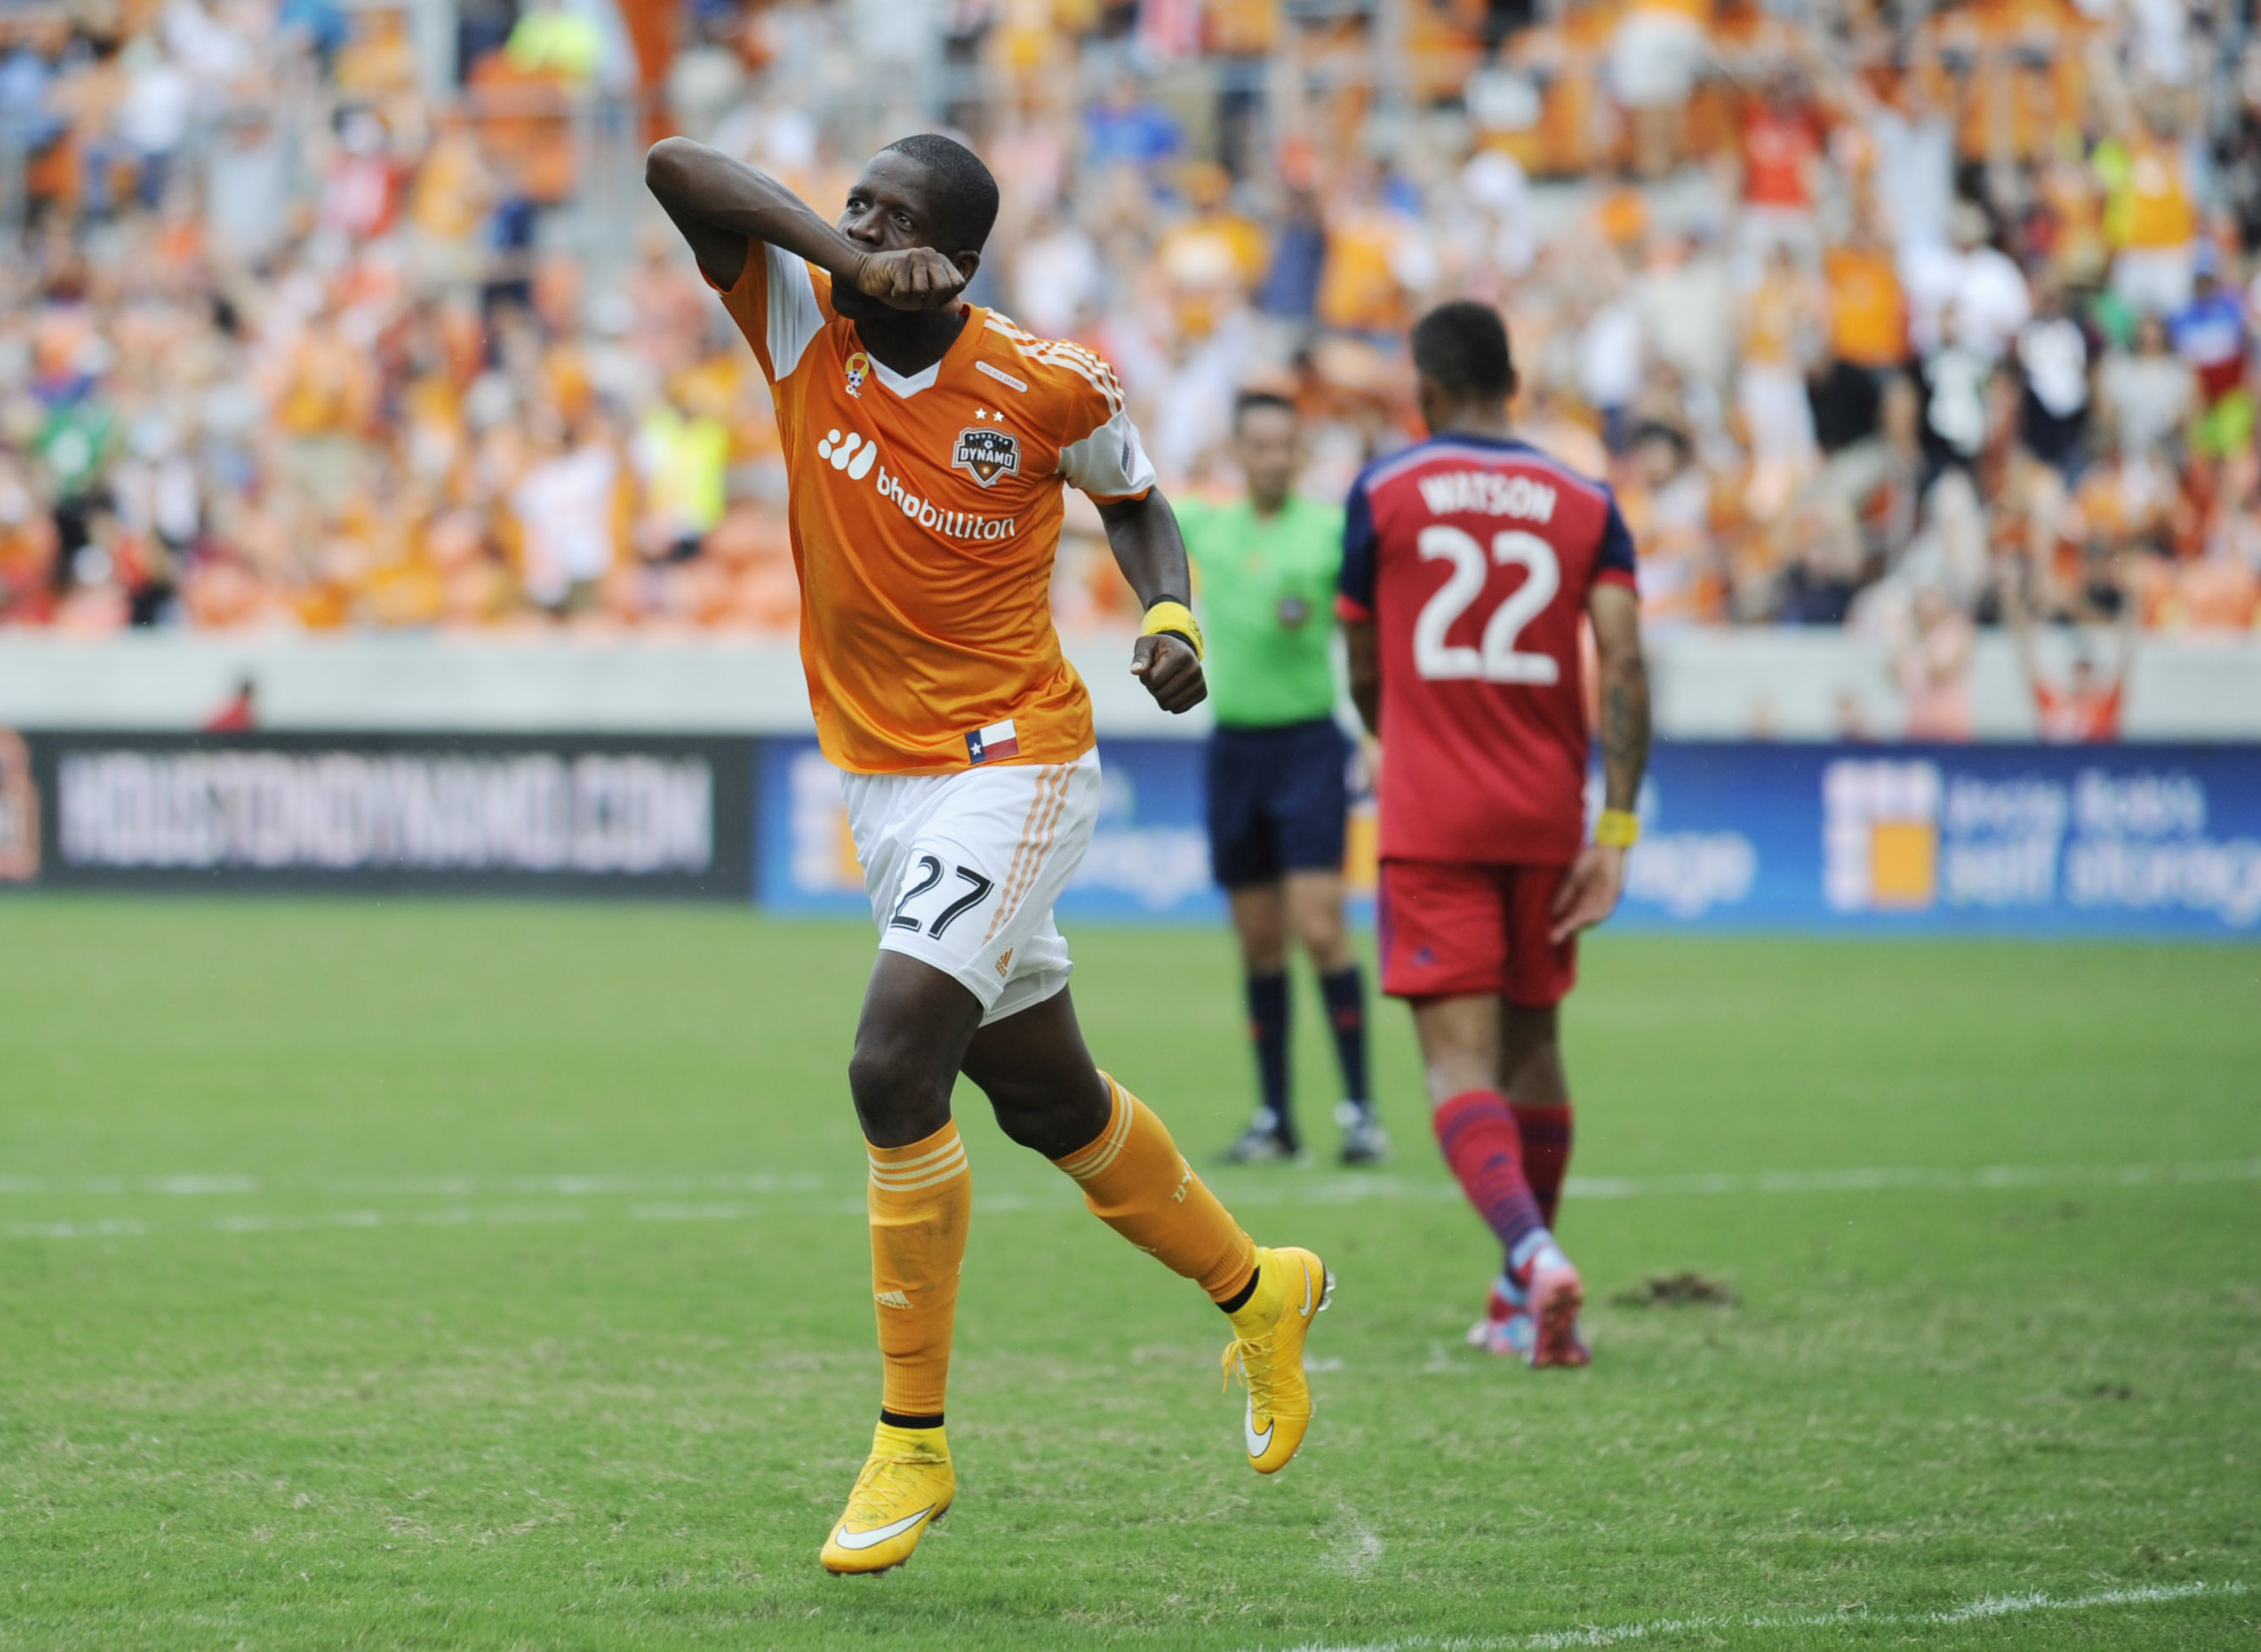 Boniek Garcia pulls away in celebration after volleying home the Dynamo's second goal in Saturday's 2-0 win over the Chicago Fire.